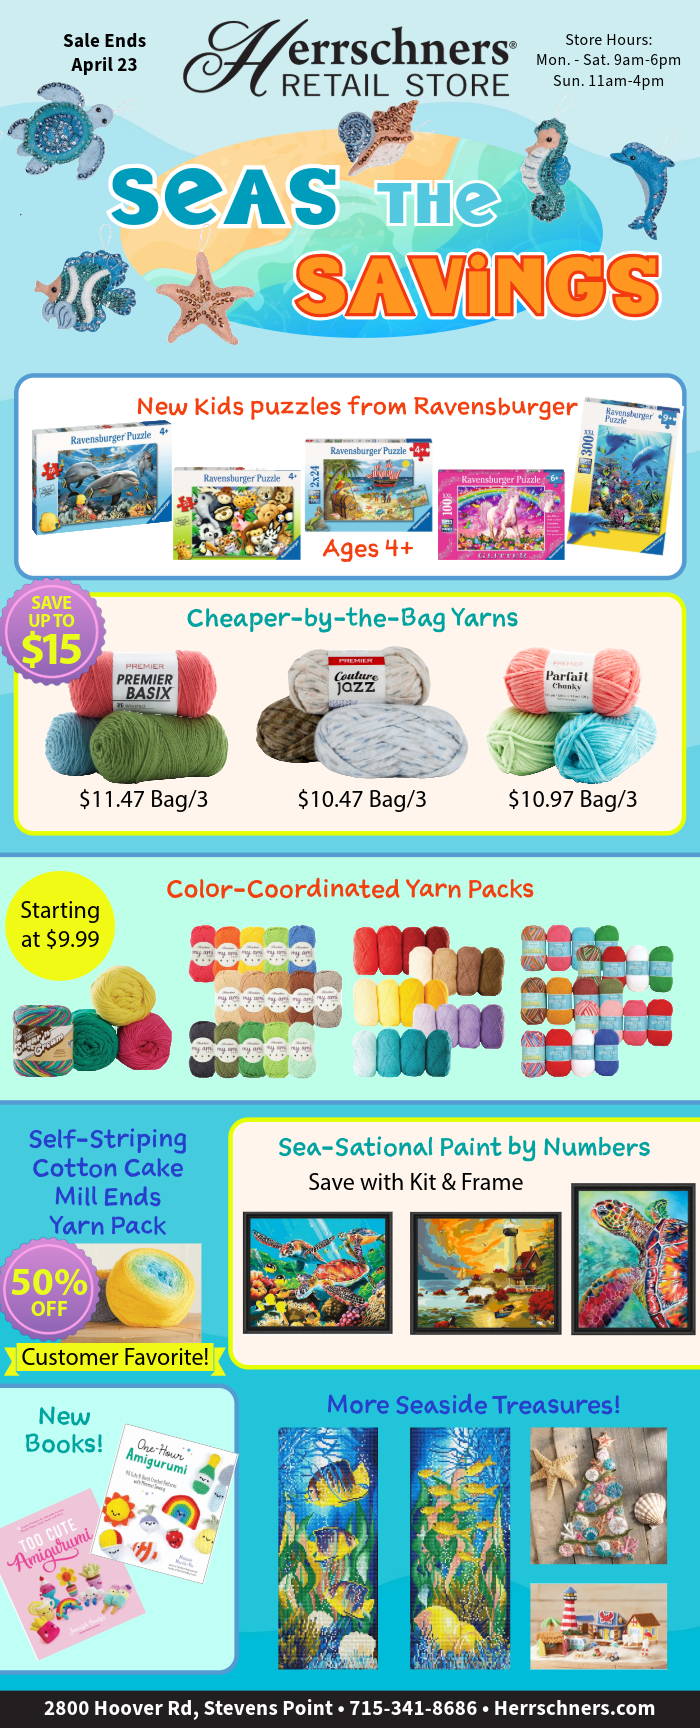 Current Retail Store Specials: Seas the Savings Sale! Images: Featured Yarns, Puzzles, and Kits.